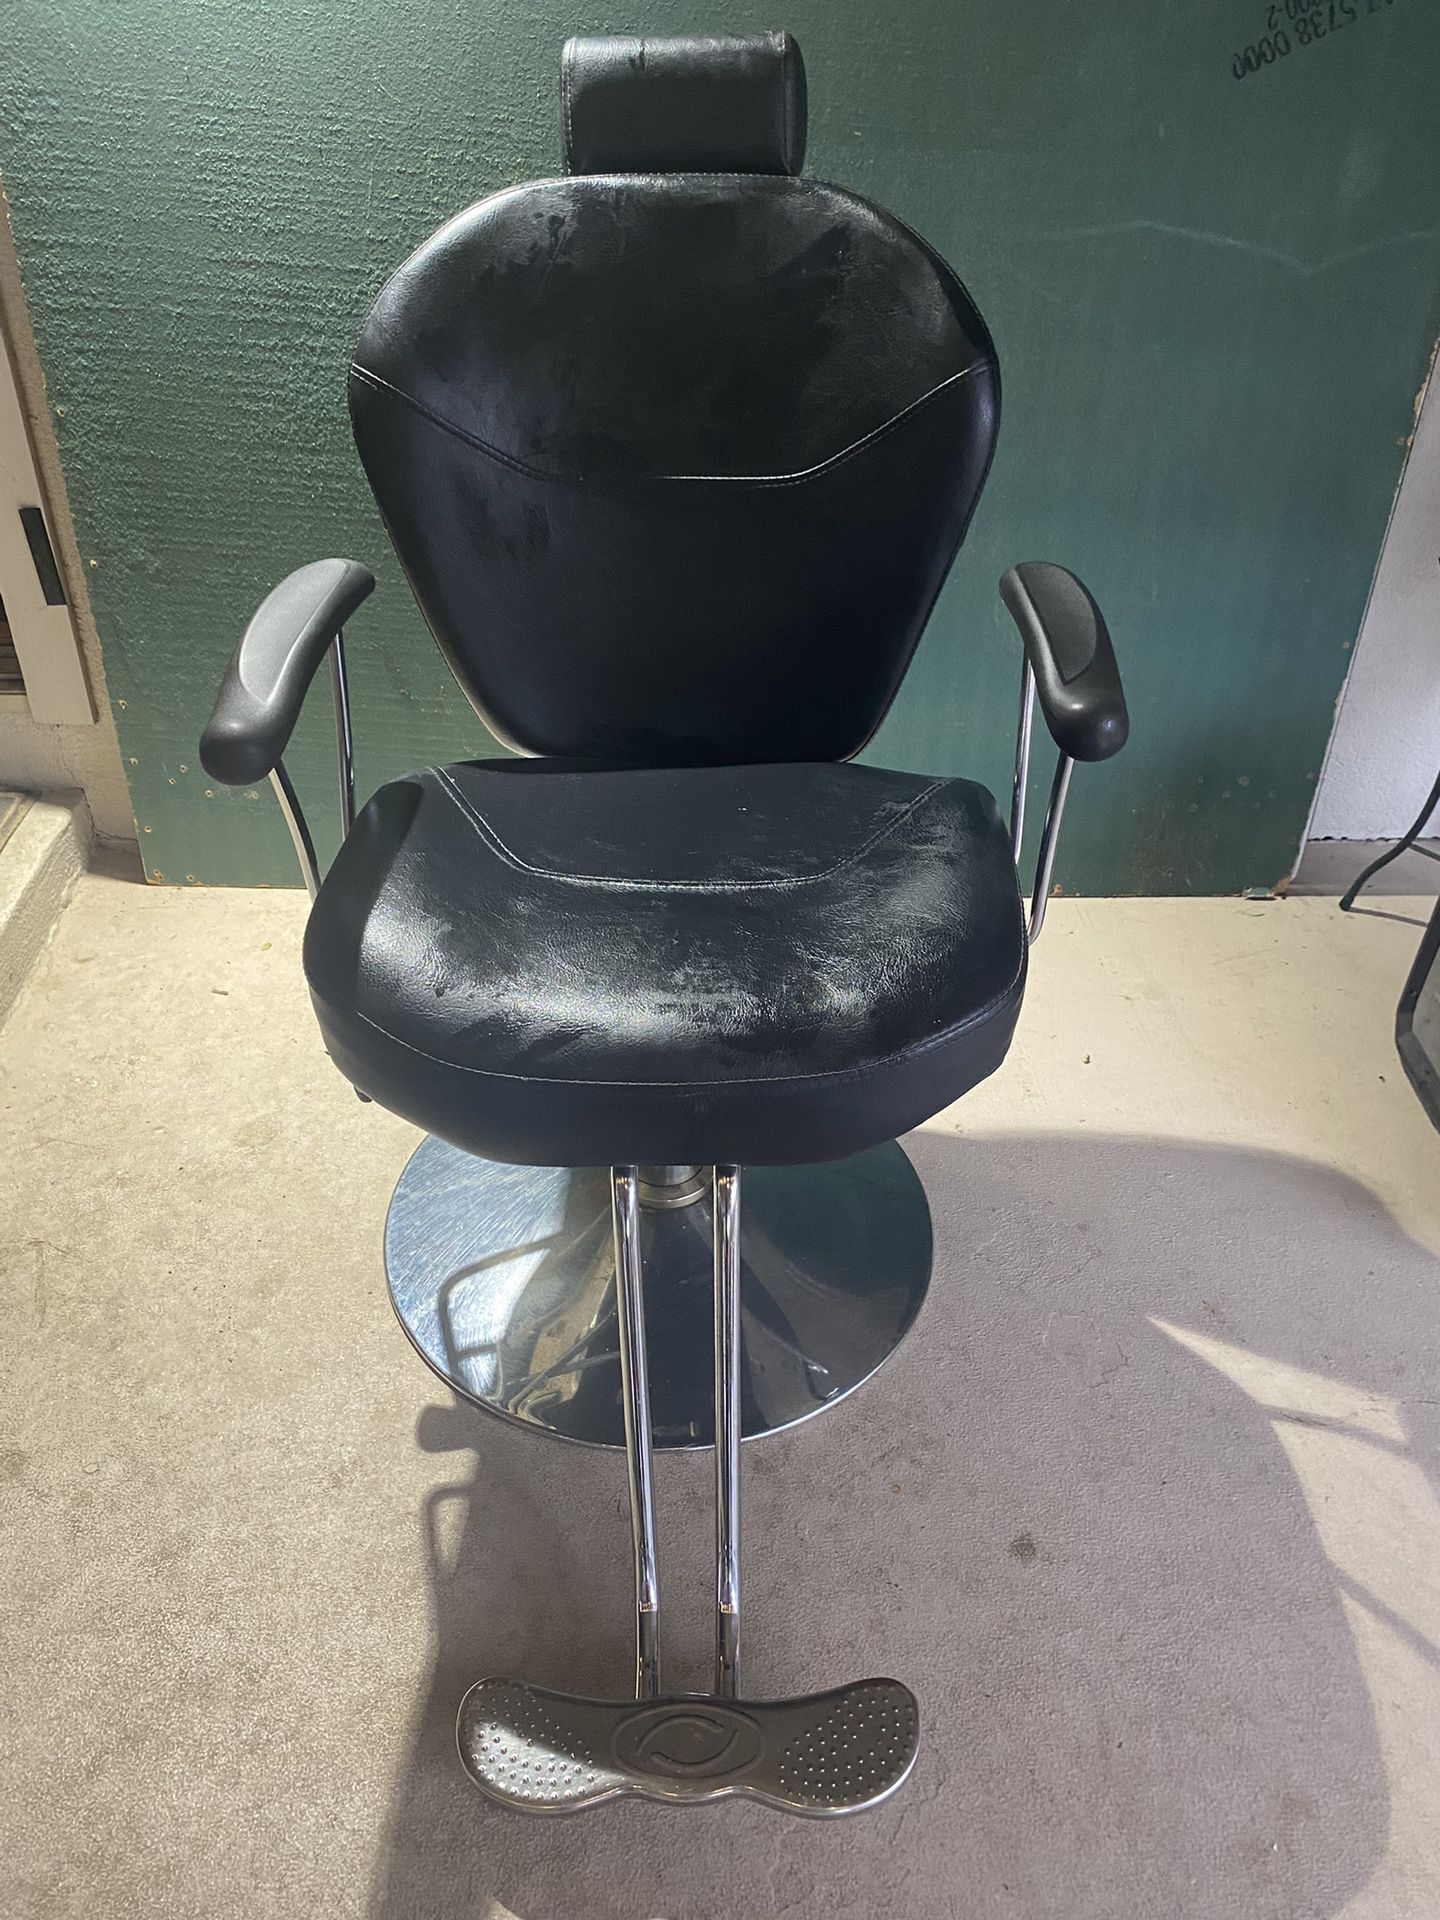 Barber Chair, New Bikes, Clocks And Others!!!!!!